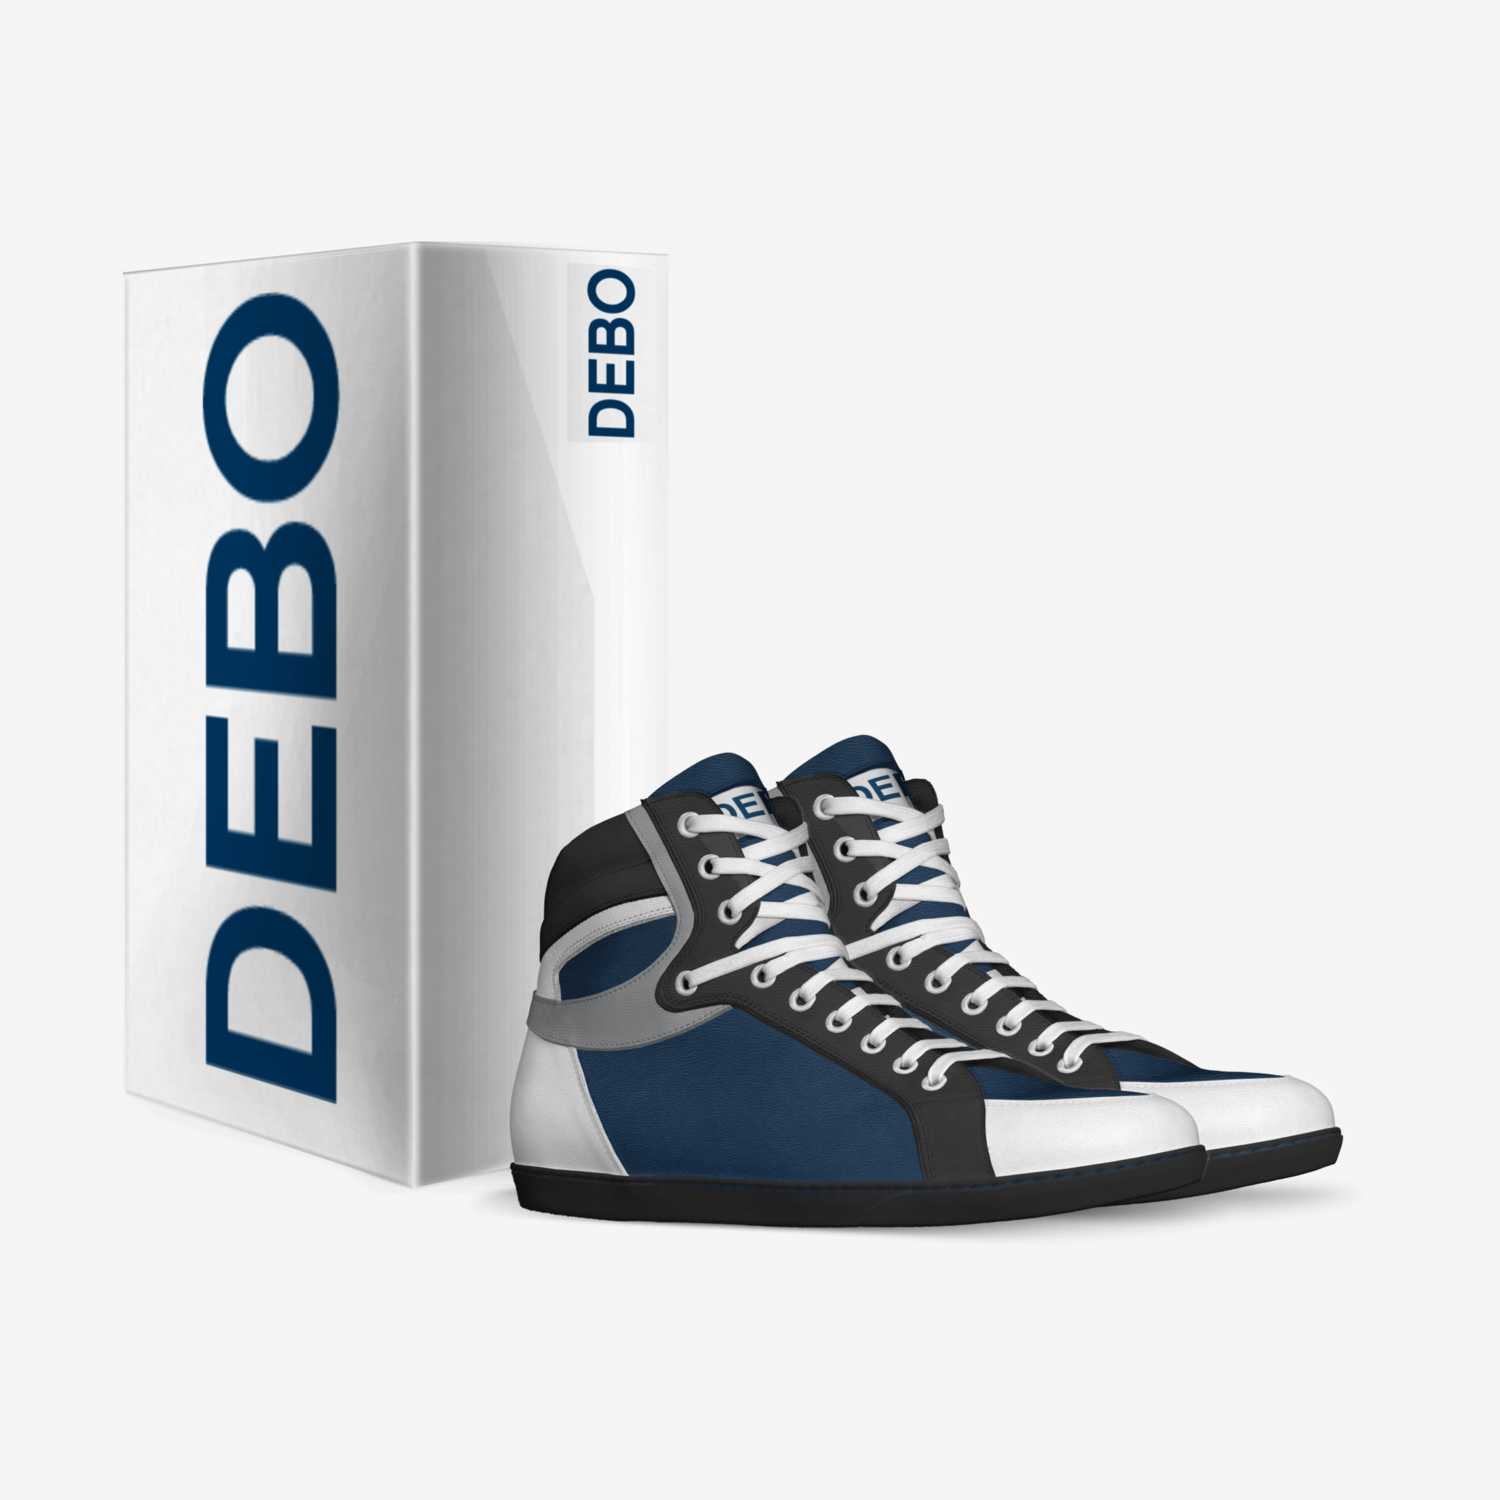 DEBO COLLECTION 2 custom made in Italy shoes by Debo Mathis | Box view